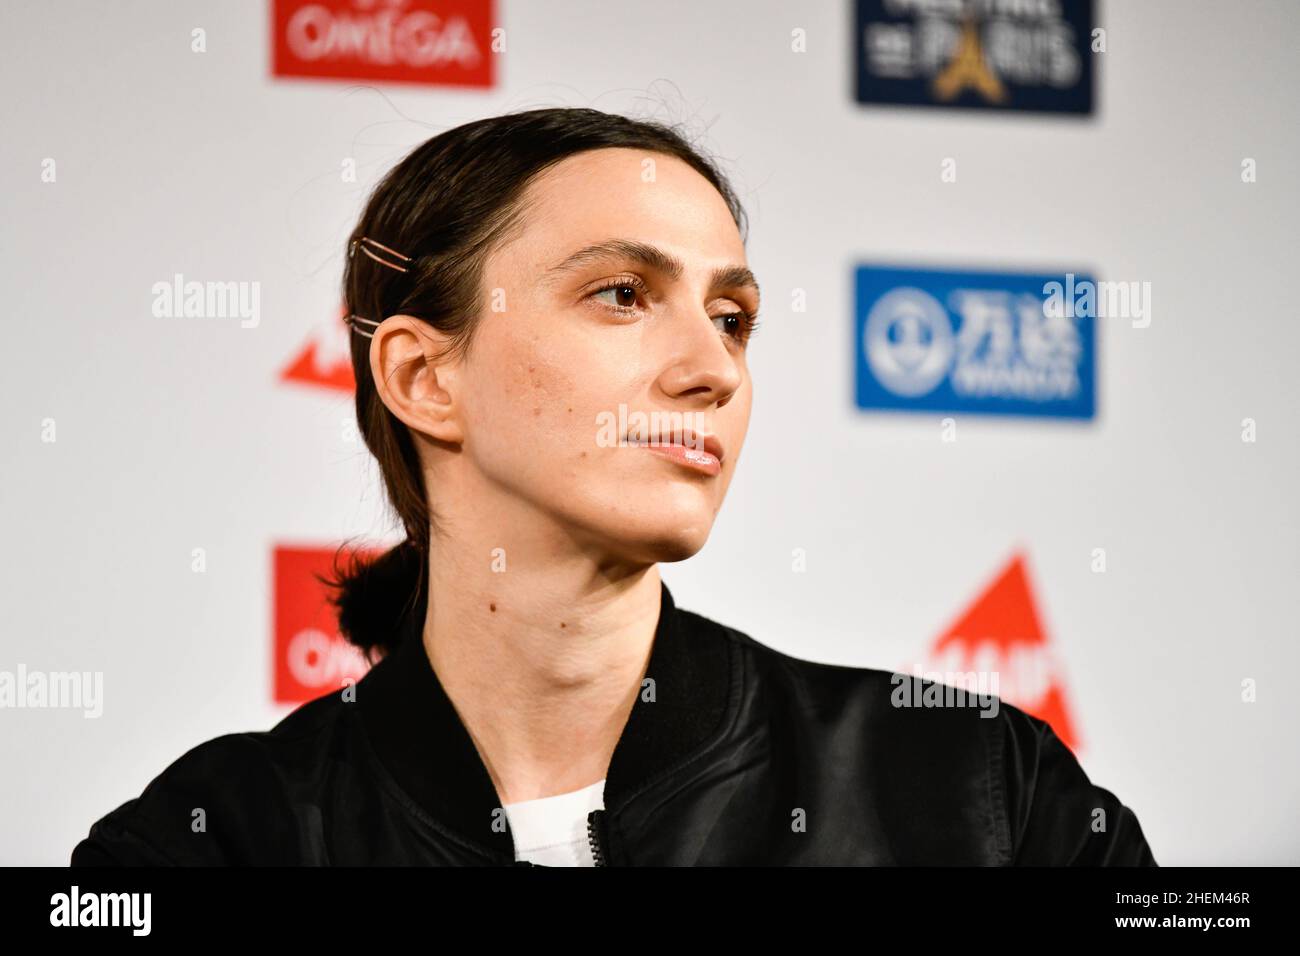 Maria Lasitskene (Women's High Jump) of Russia but representing the Authorised Neutral Athlete (ANA) attends the press conference prior to Meeting de Stock Photo